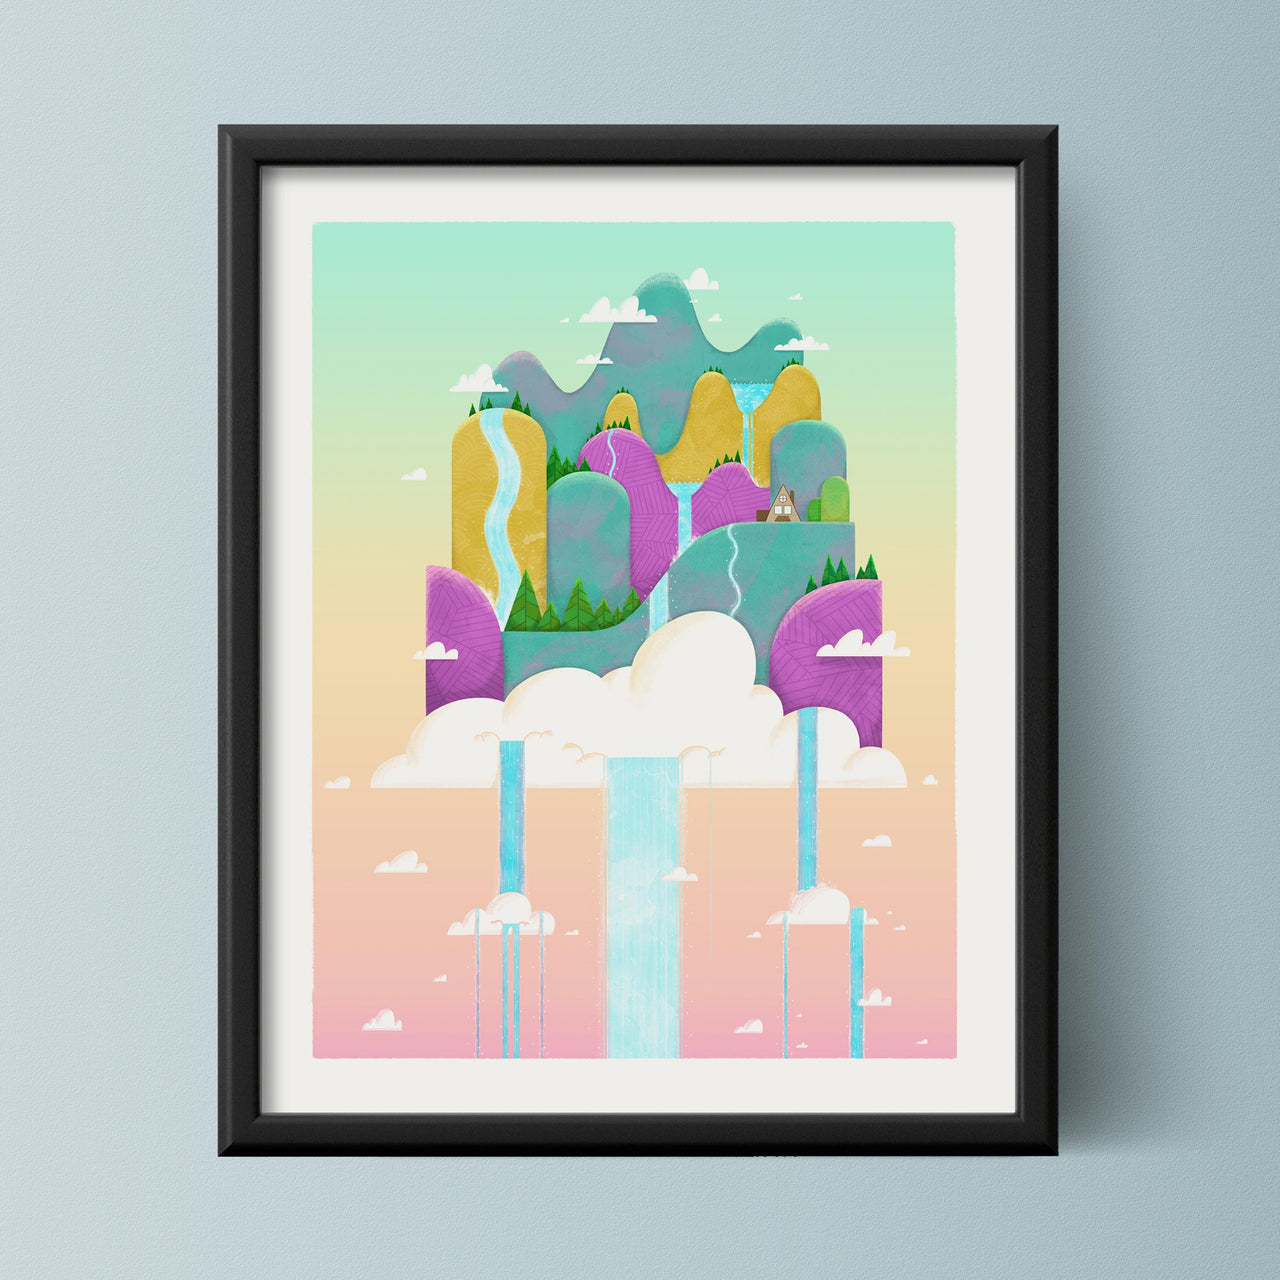 Island in the Clouds: Day | 16x20 Unframed Art Poster